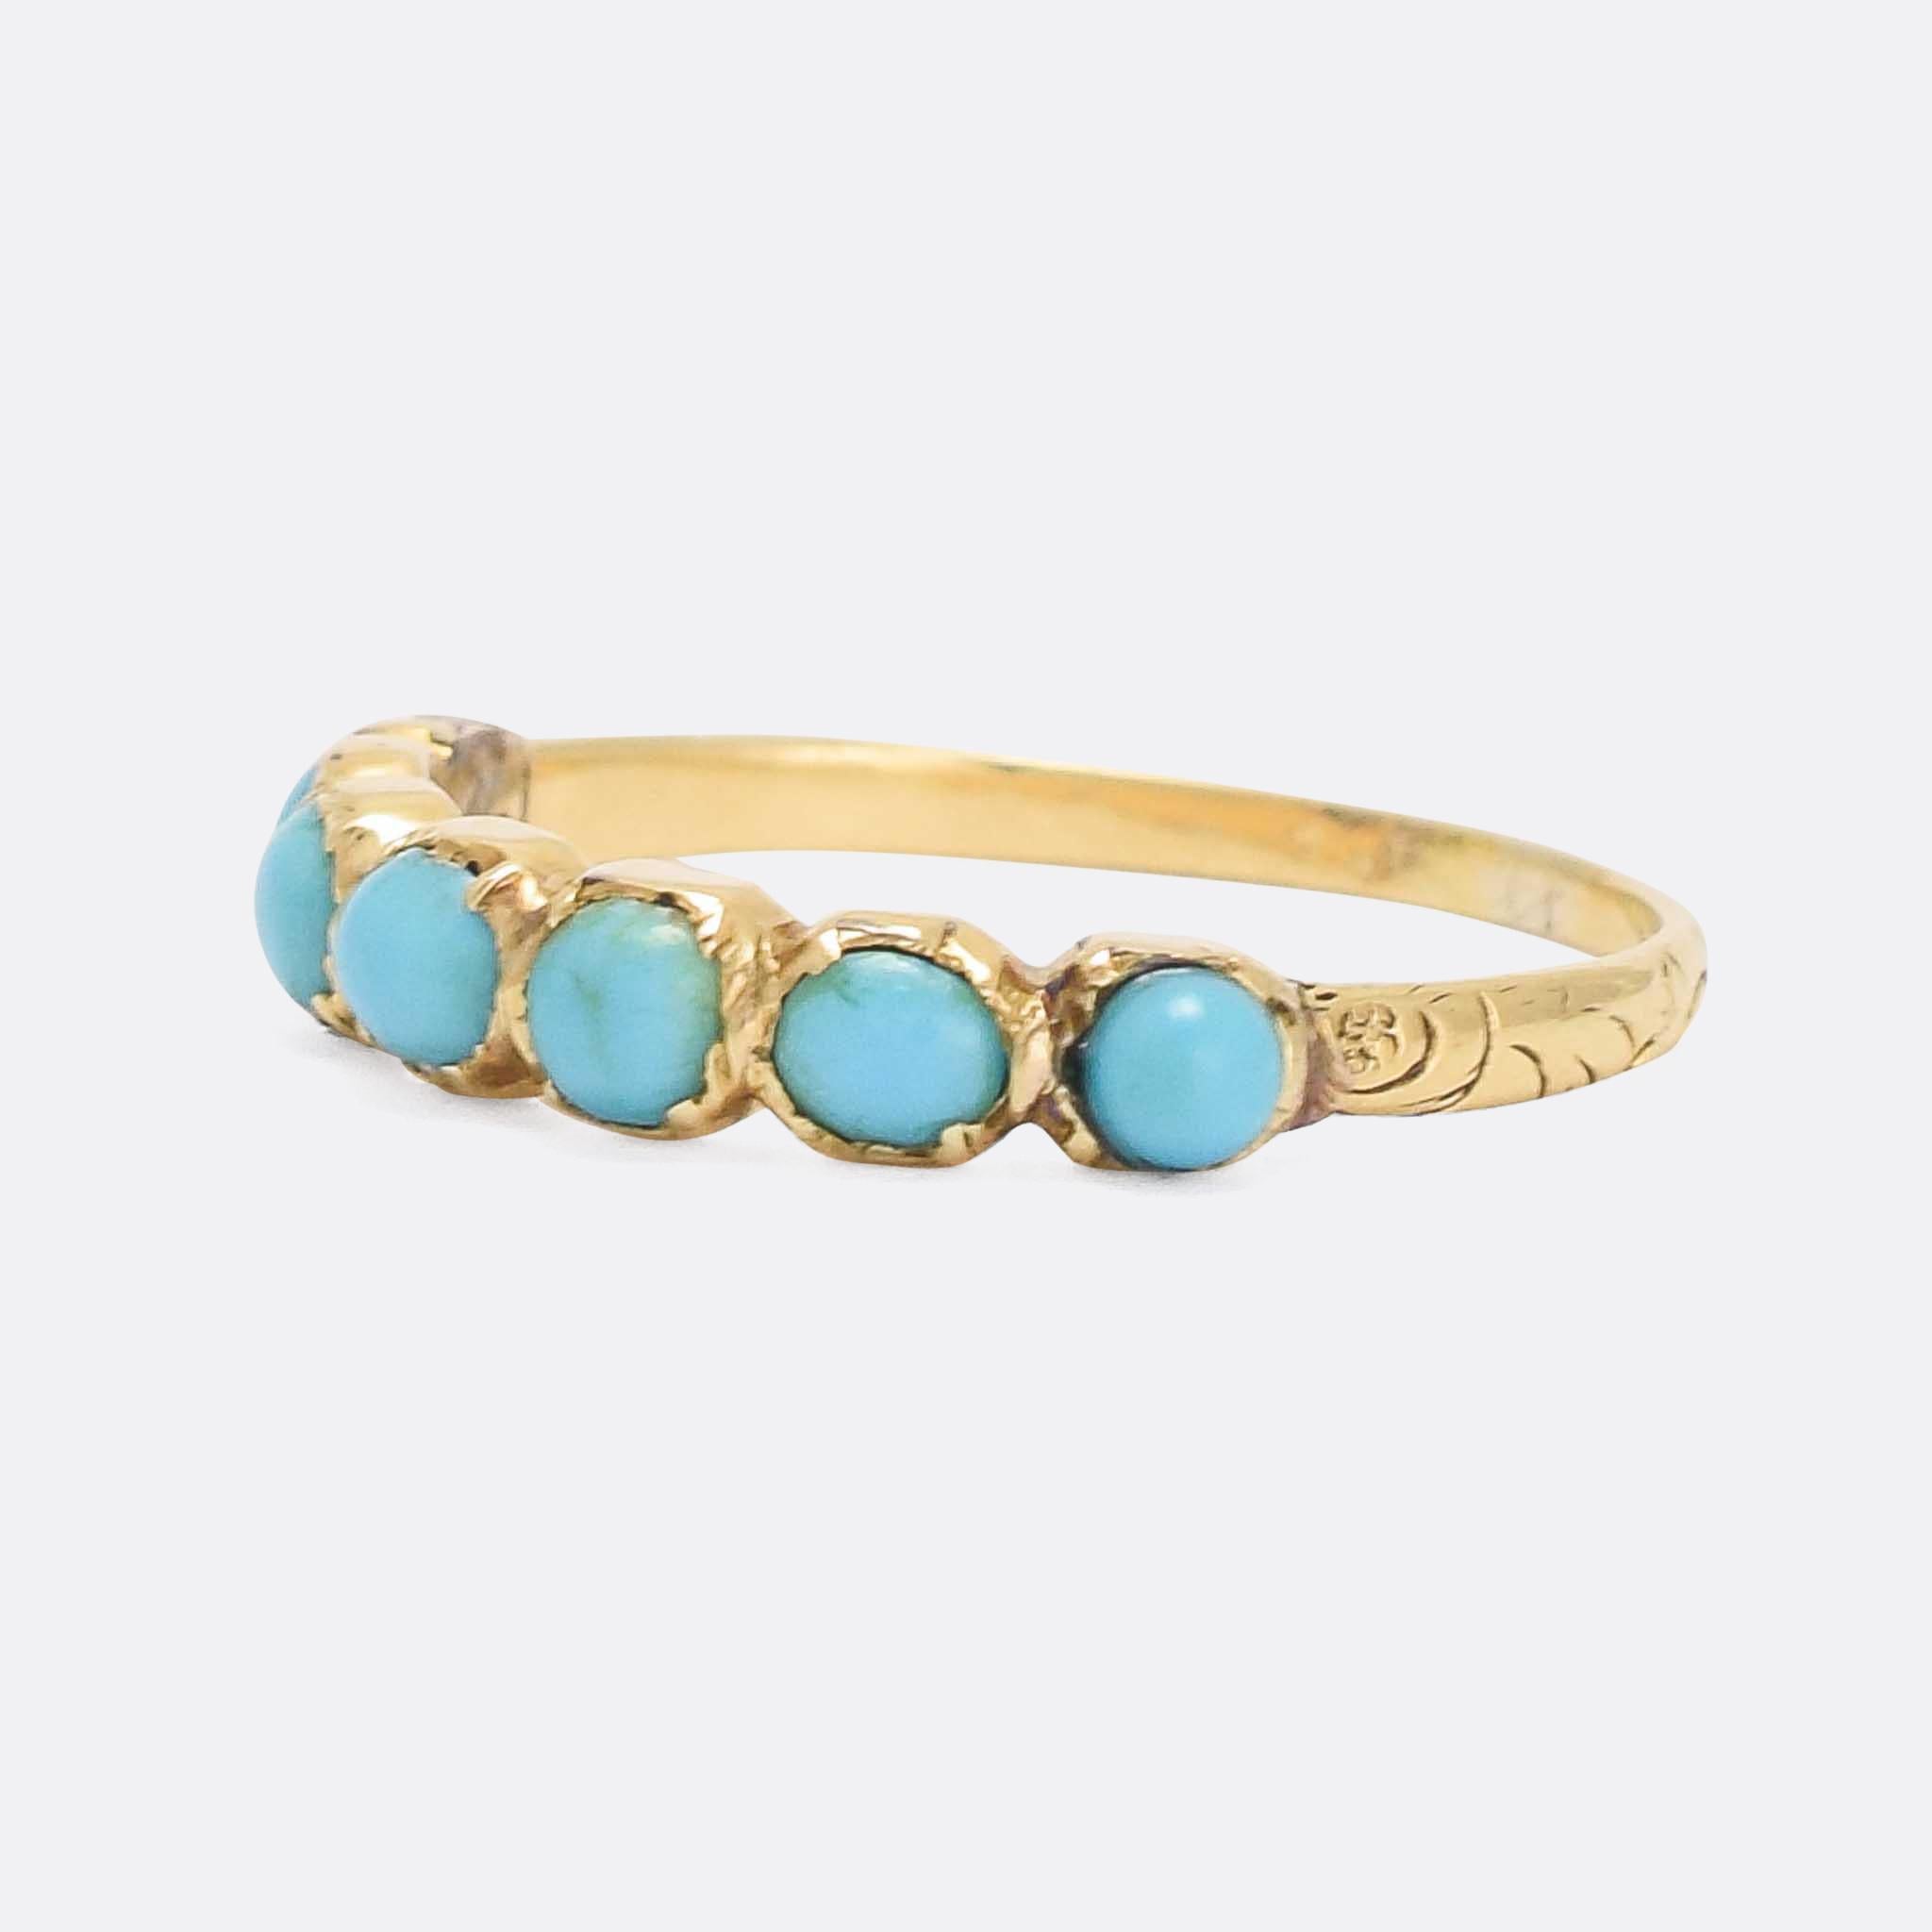 A gorgeous Georgian turquoise half-hoop eternity ring dating from the early 19th Century, circa 1820. The stones are vivid and remain in great condition, and the band has pretty foliate detailing to the shoulders. Modelled in 15k gold.

STONES